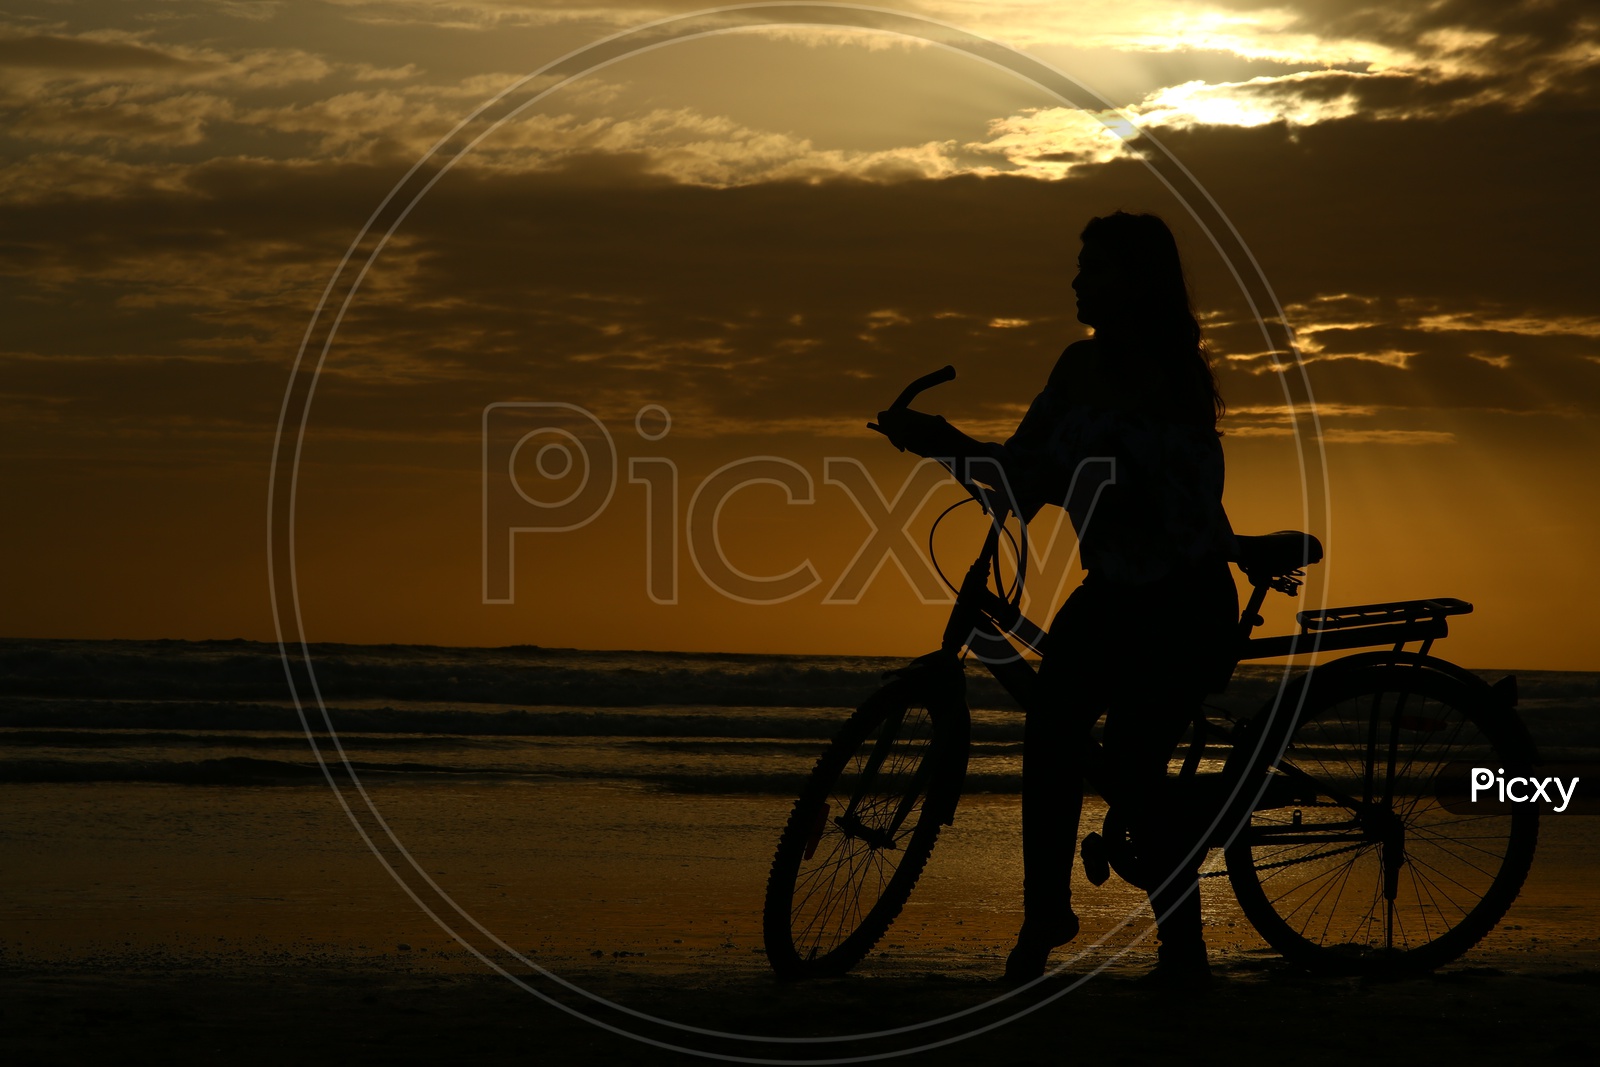 Silhouette Of a Young Girl With Bicycle In a Beach With Golden Sky In Background